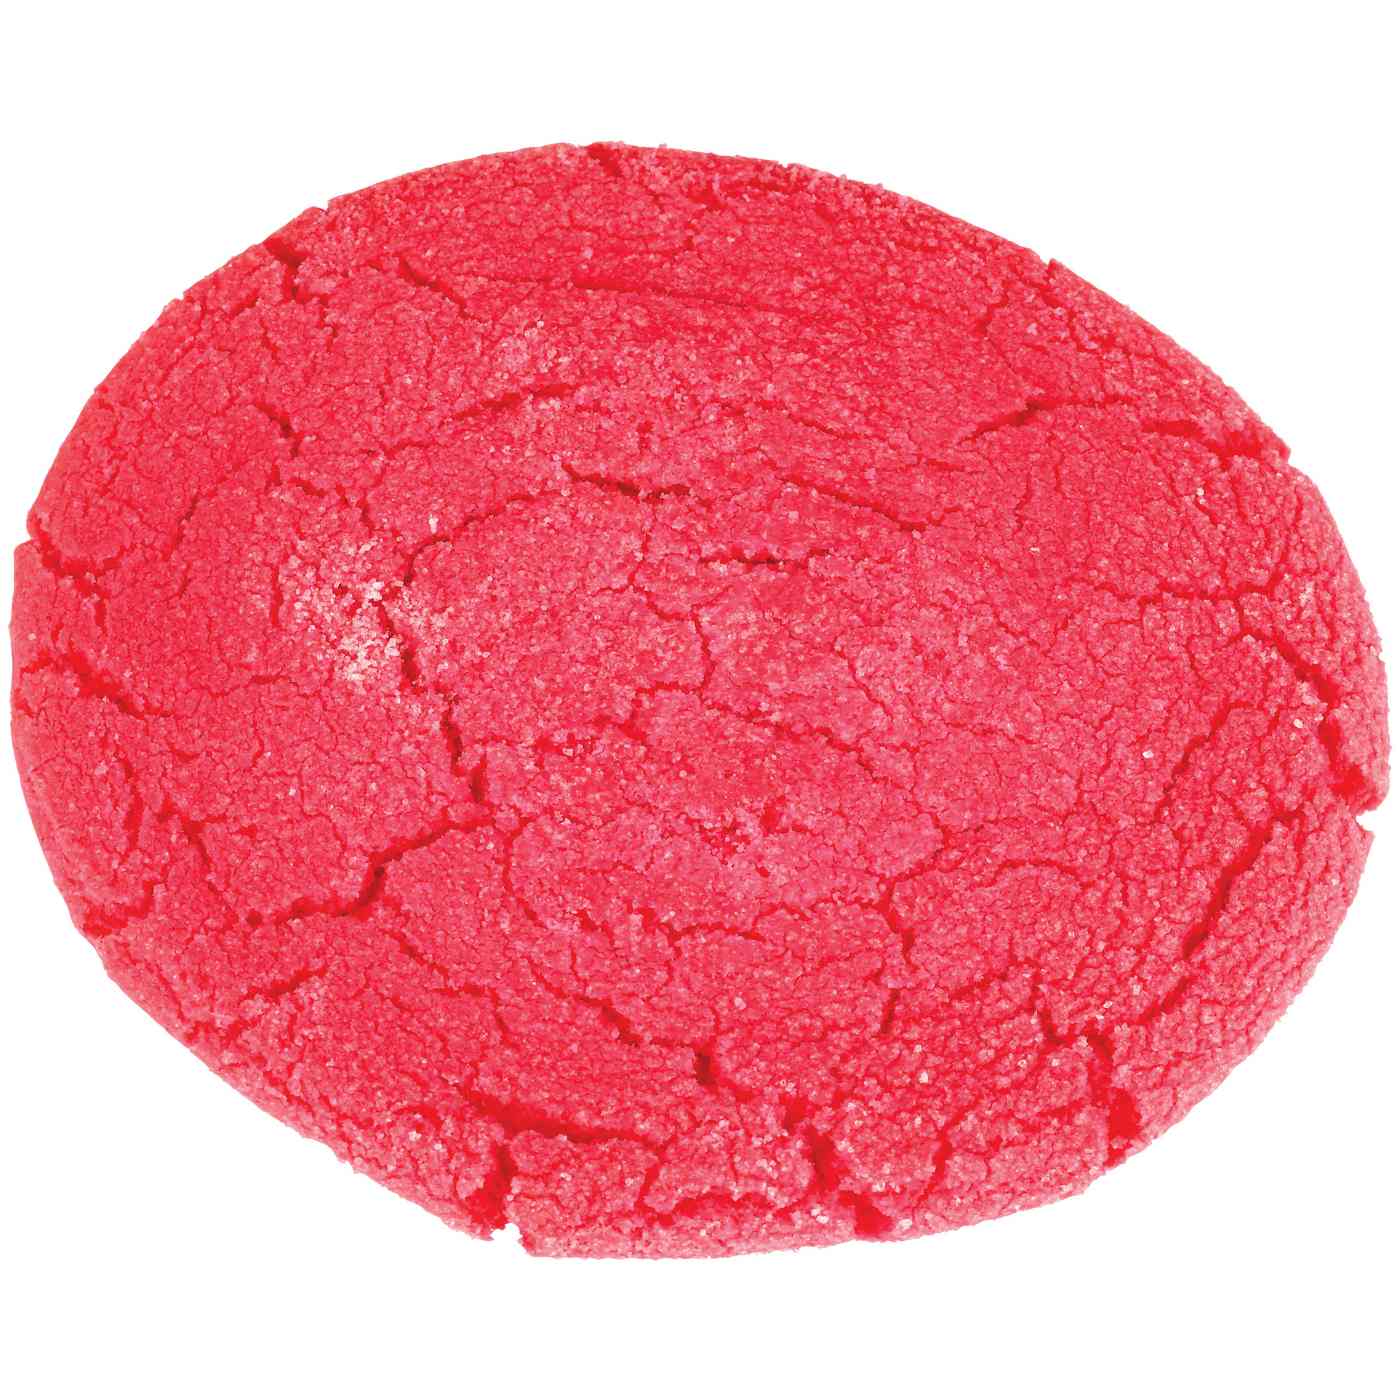 H-E-B Bakery Large Polvoron Cookies - Pink; image 3 of 3